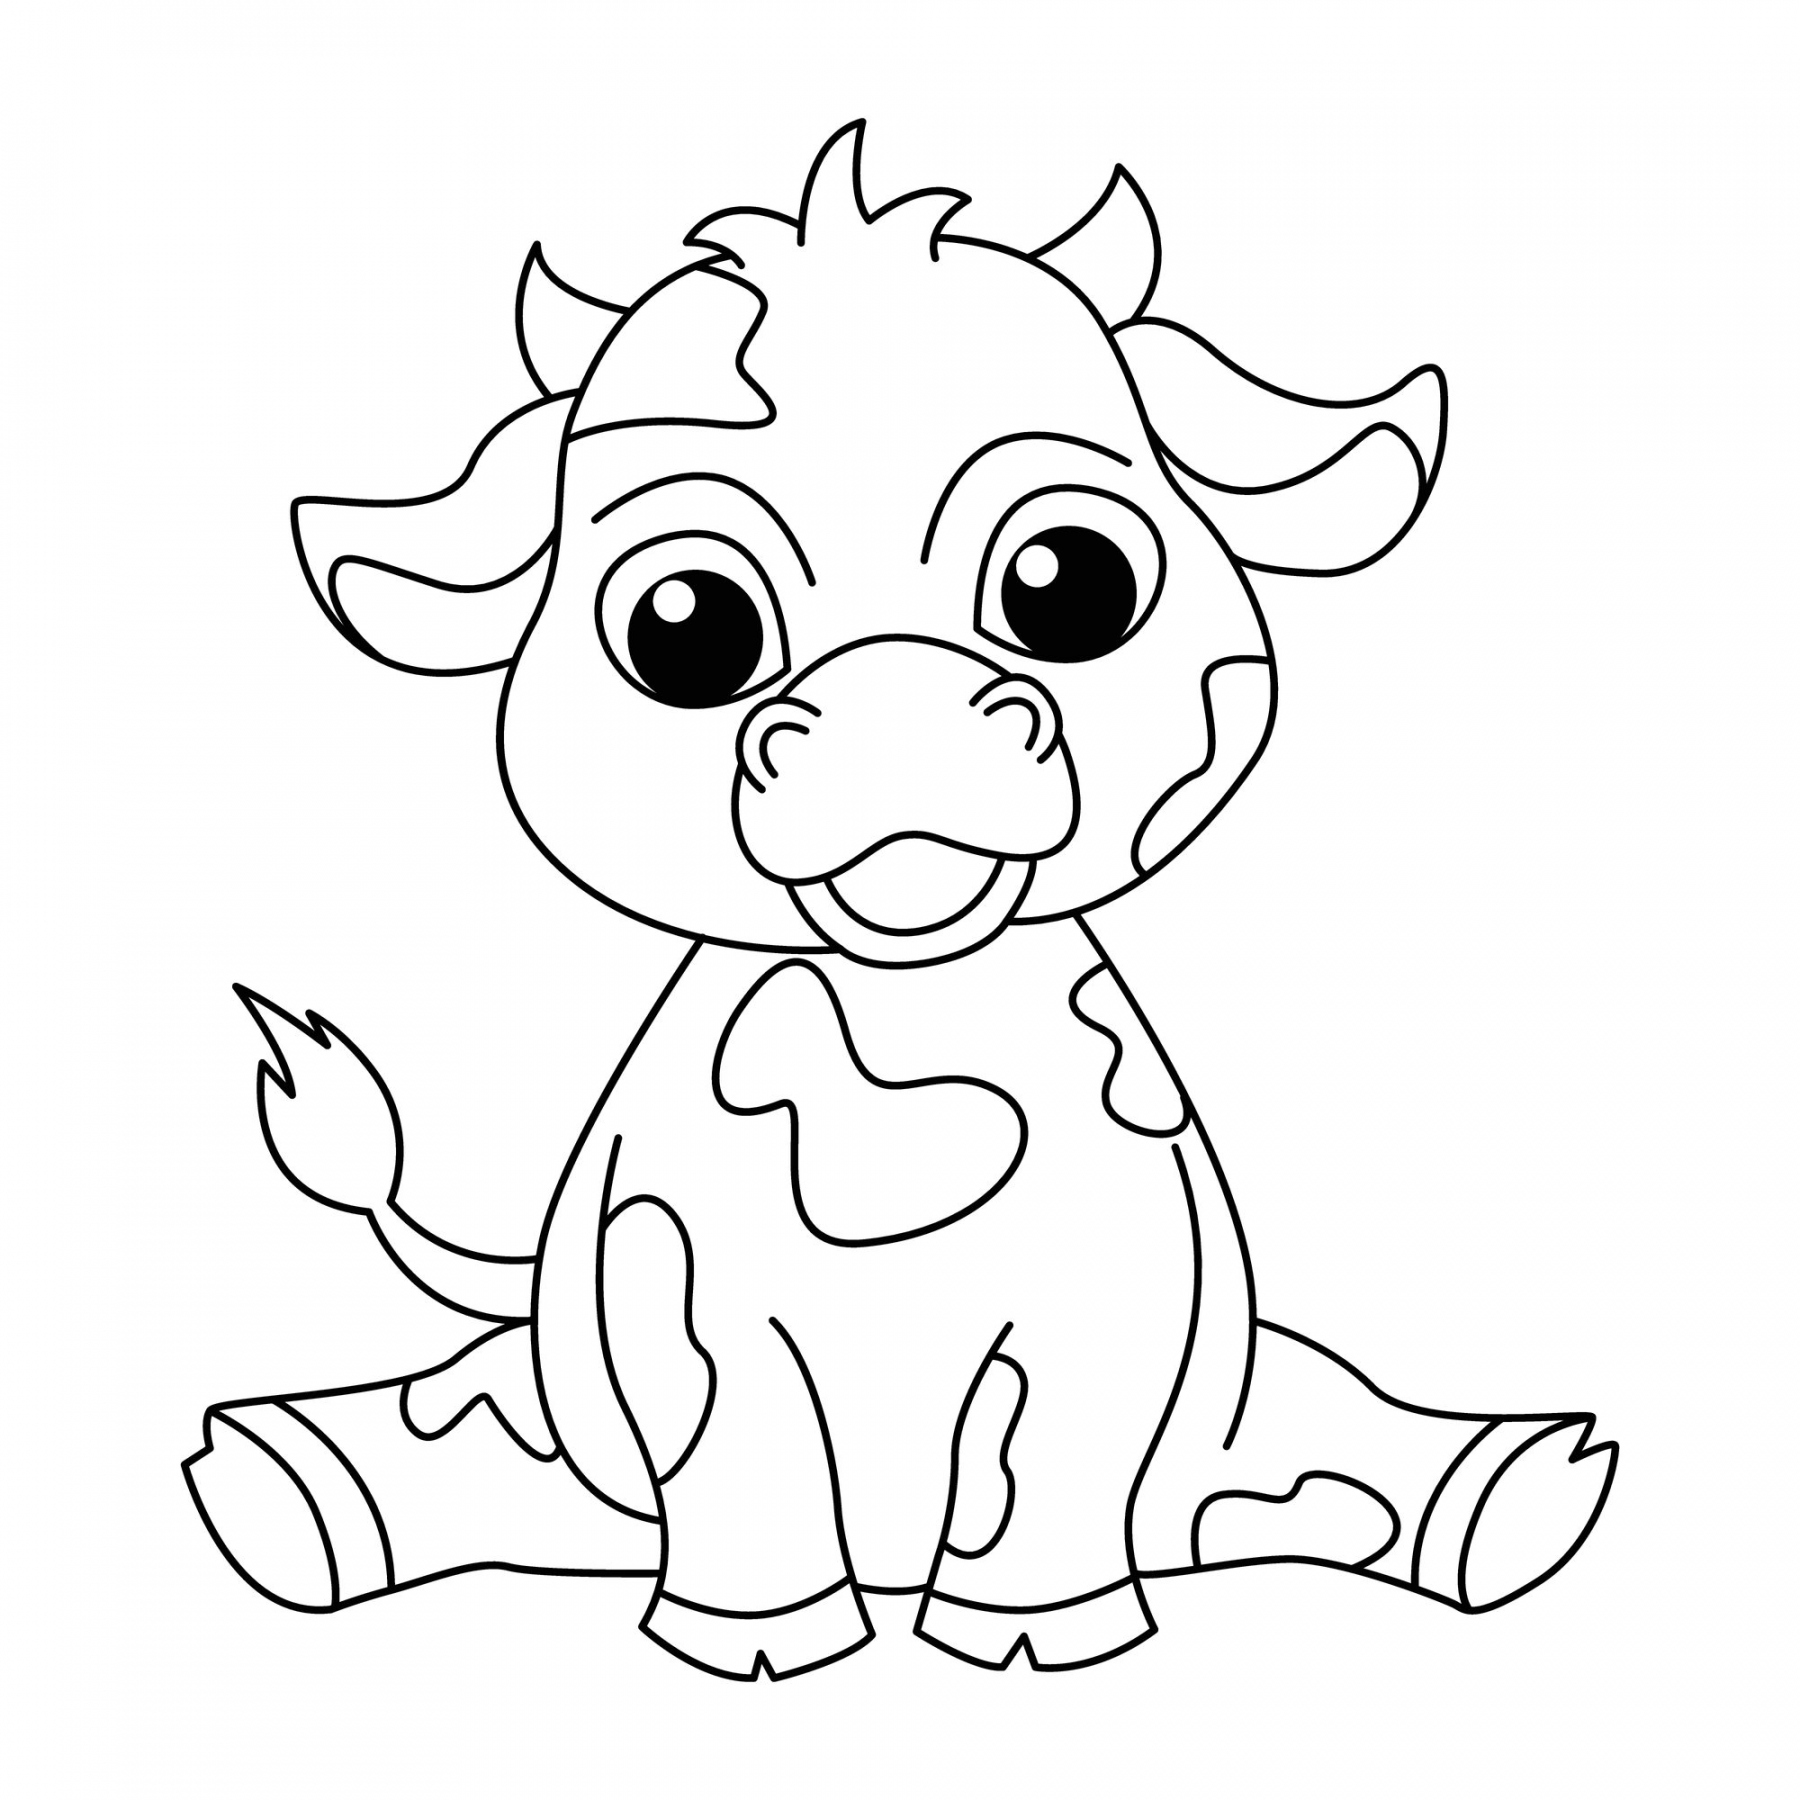 Printable Coloring Pages Free - Printable - Free Printable Colouring Pages for Kids - McQueens Dairies